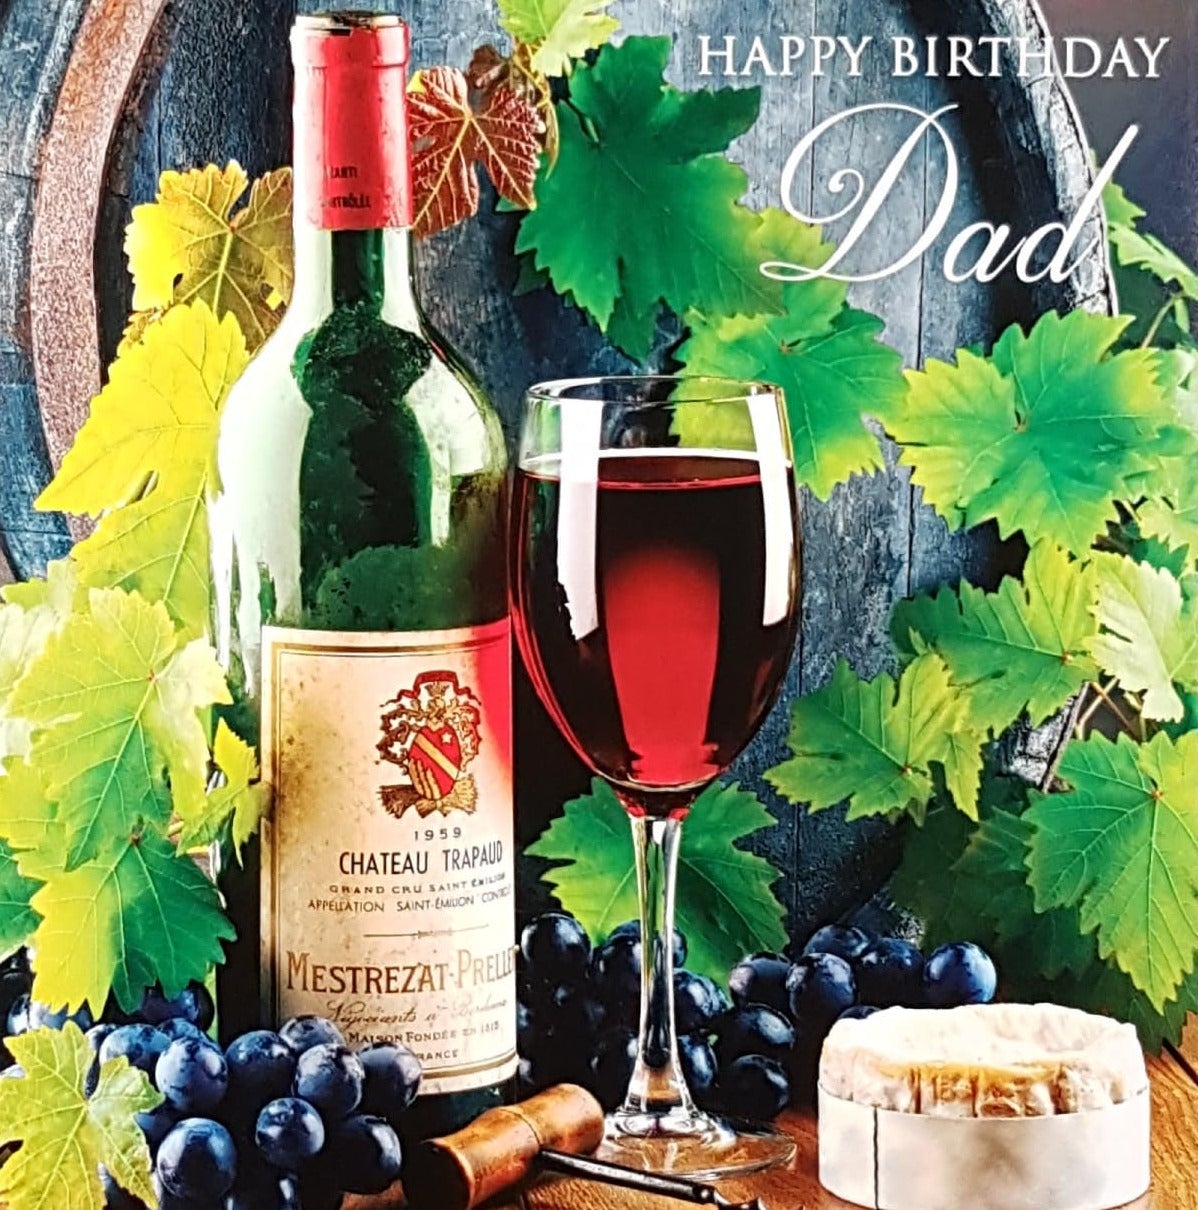 Birthday Card - Dad / A Glass Of Red Wine & Grapes